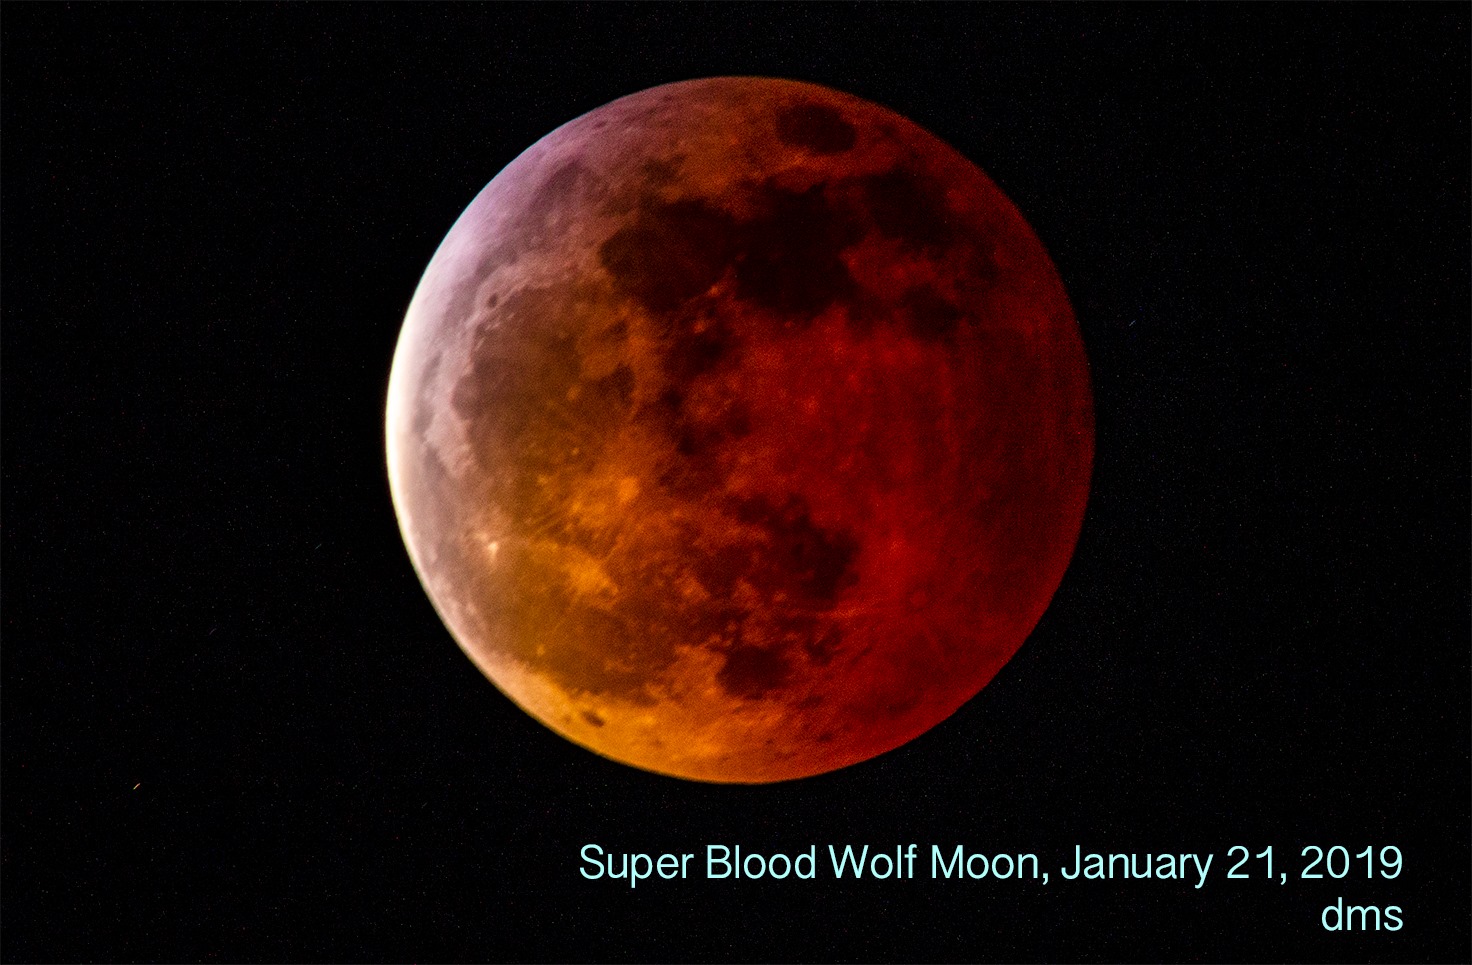 50554466 10216189785912179 6367590870916530176 o It was a ‘Super Blood Wolf Moon’ takeover in Birmingham last night - see the photos